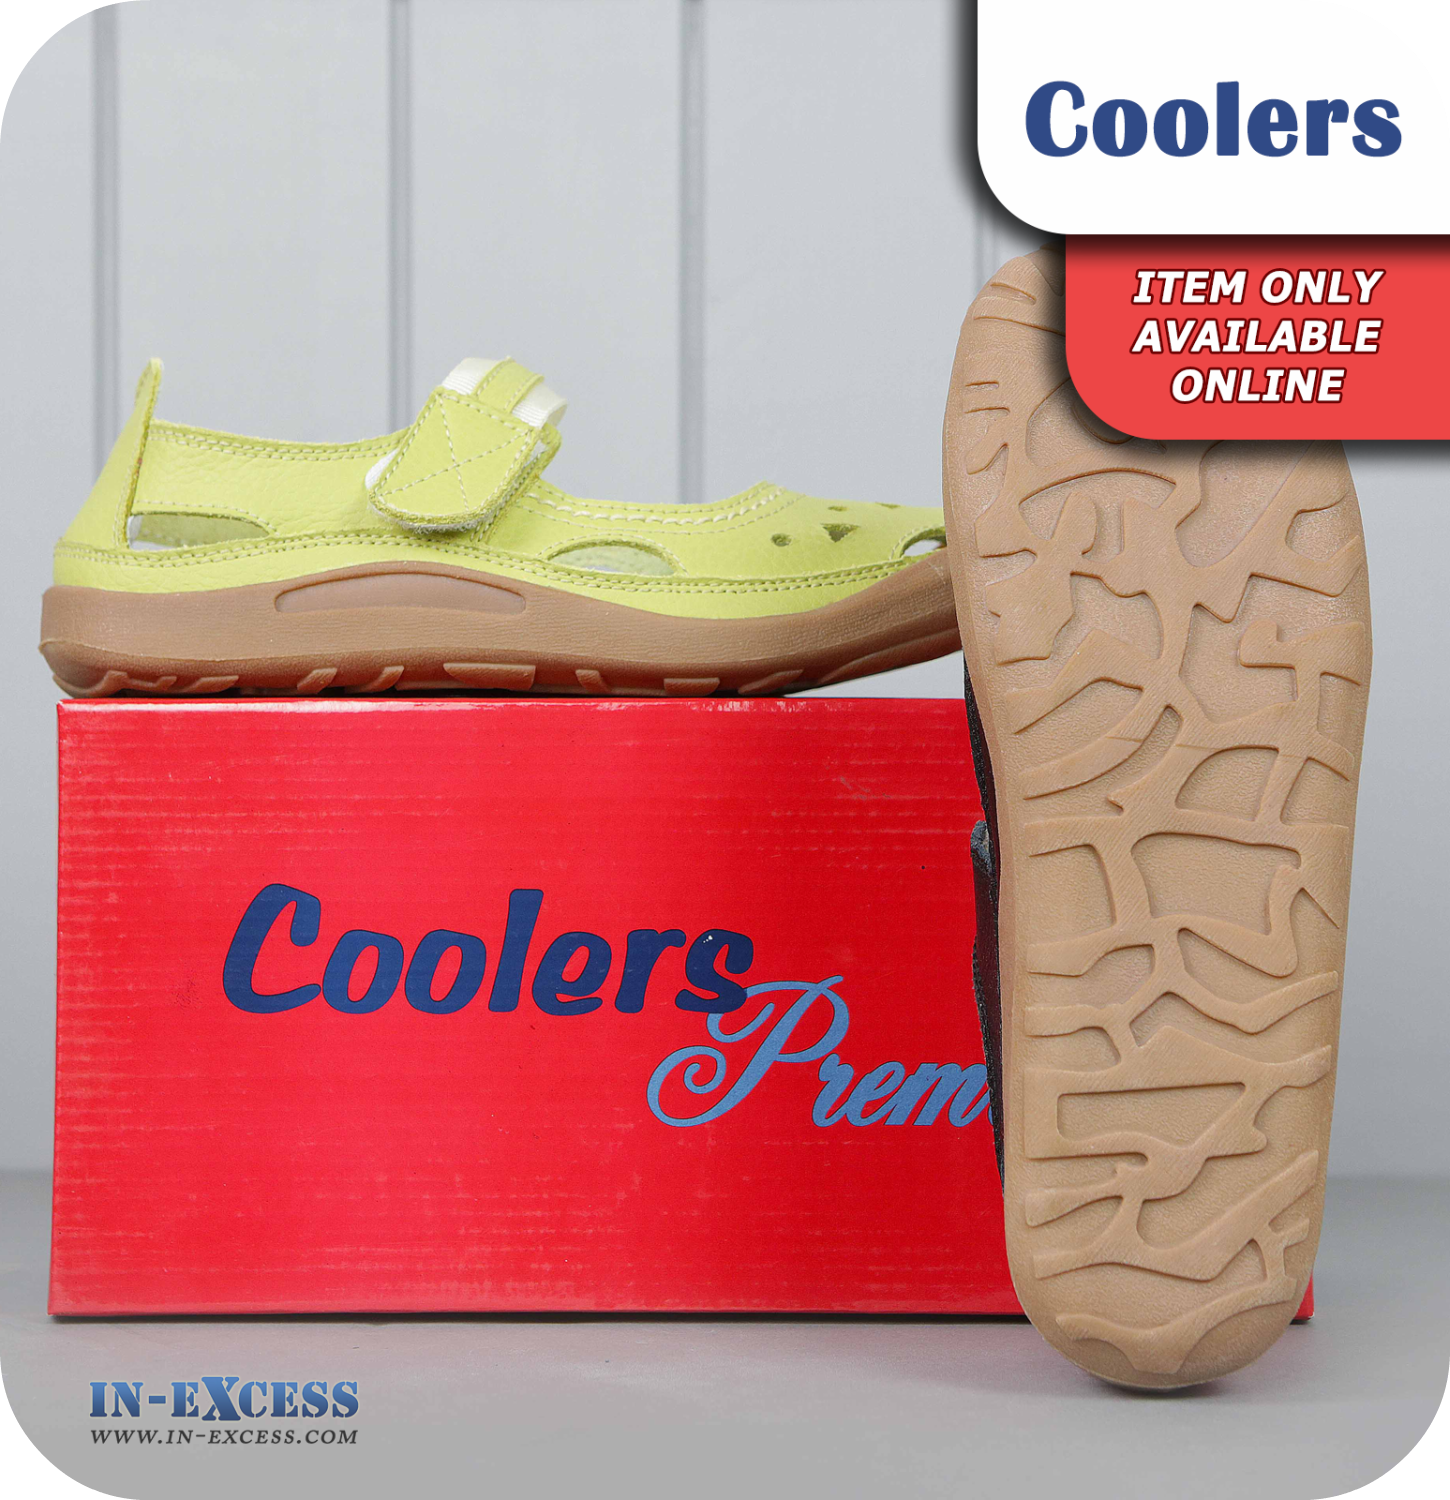 Coolers Premier Leather Sandals - Green